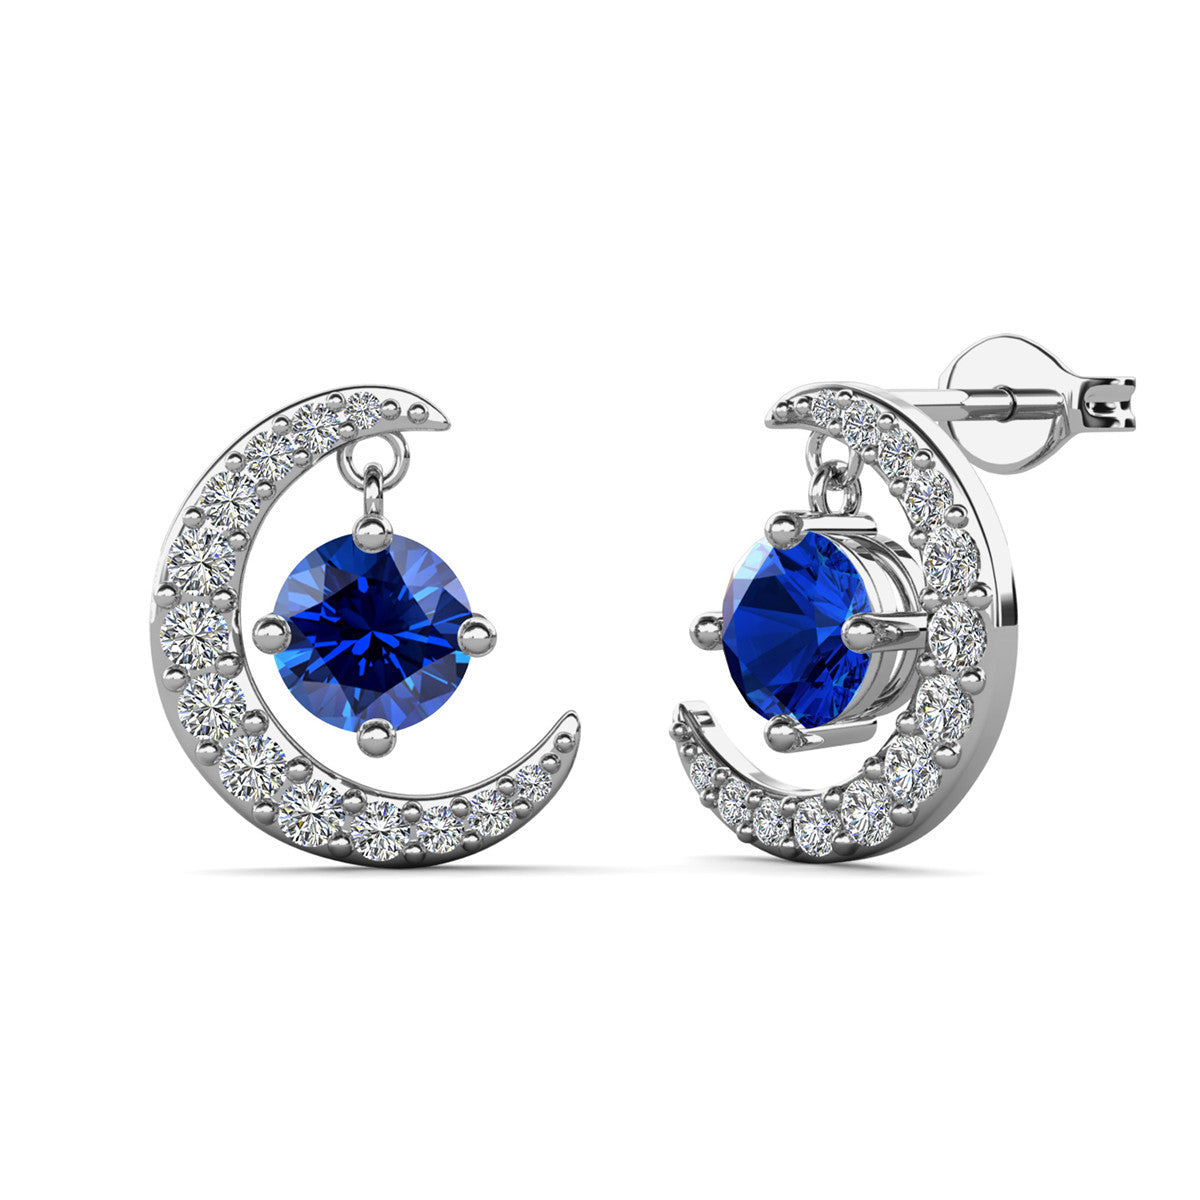 Luna Birthstone Stud Earrings 18k White Gold Plated with Round Cut Crystals